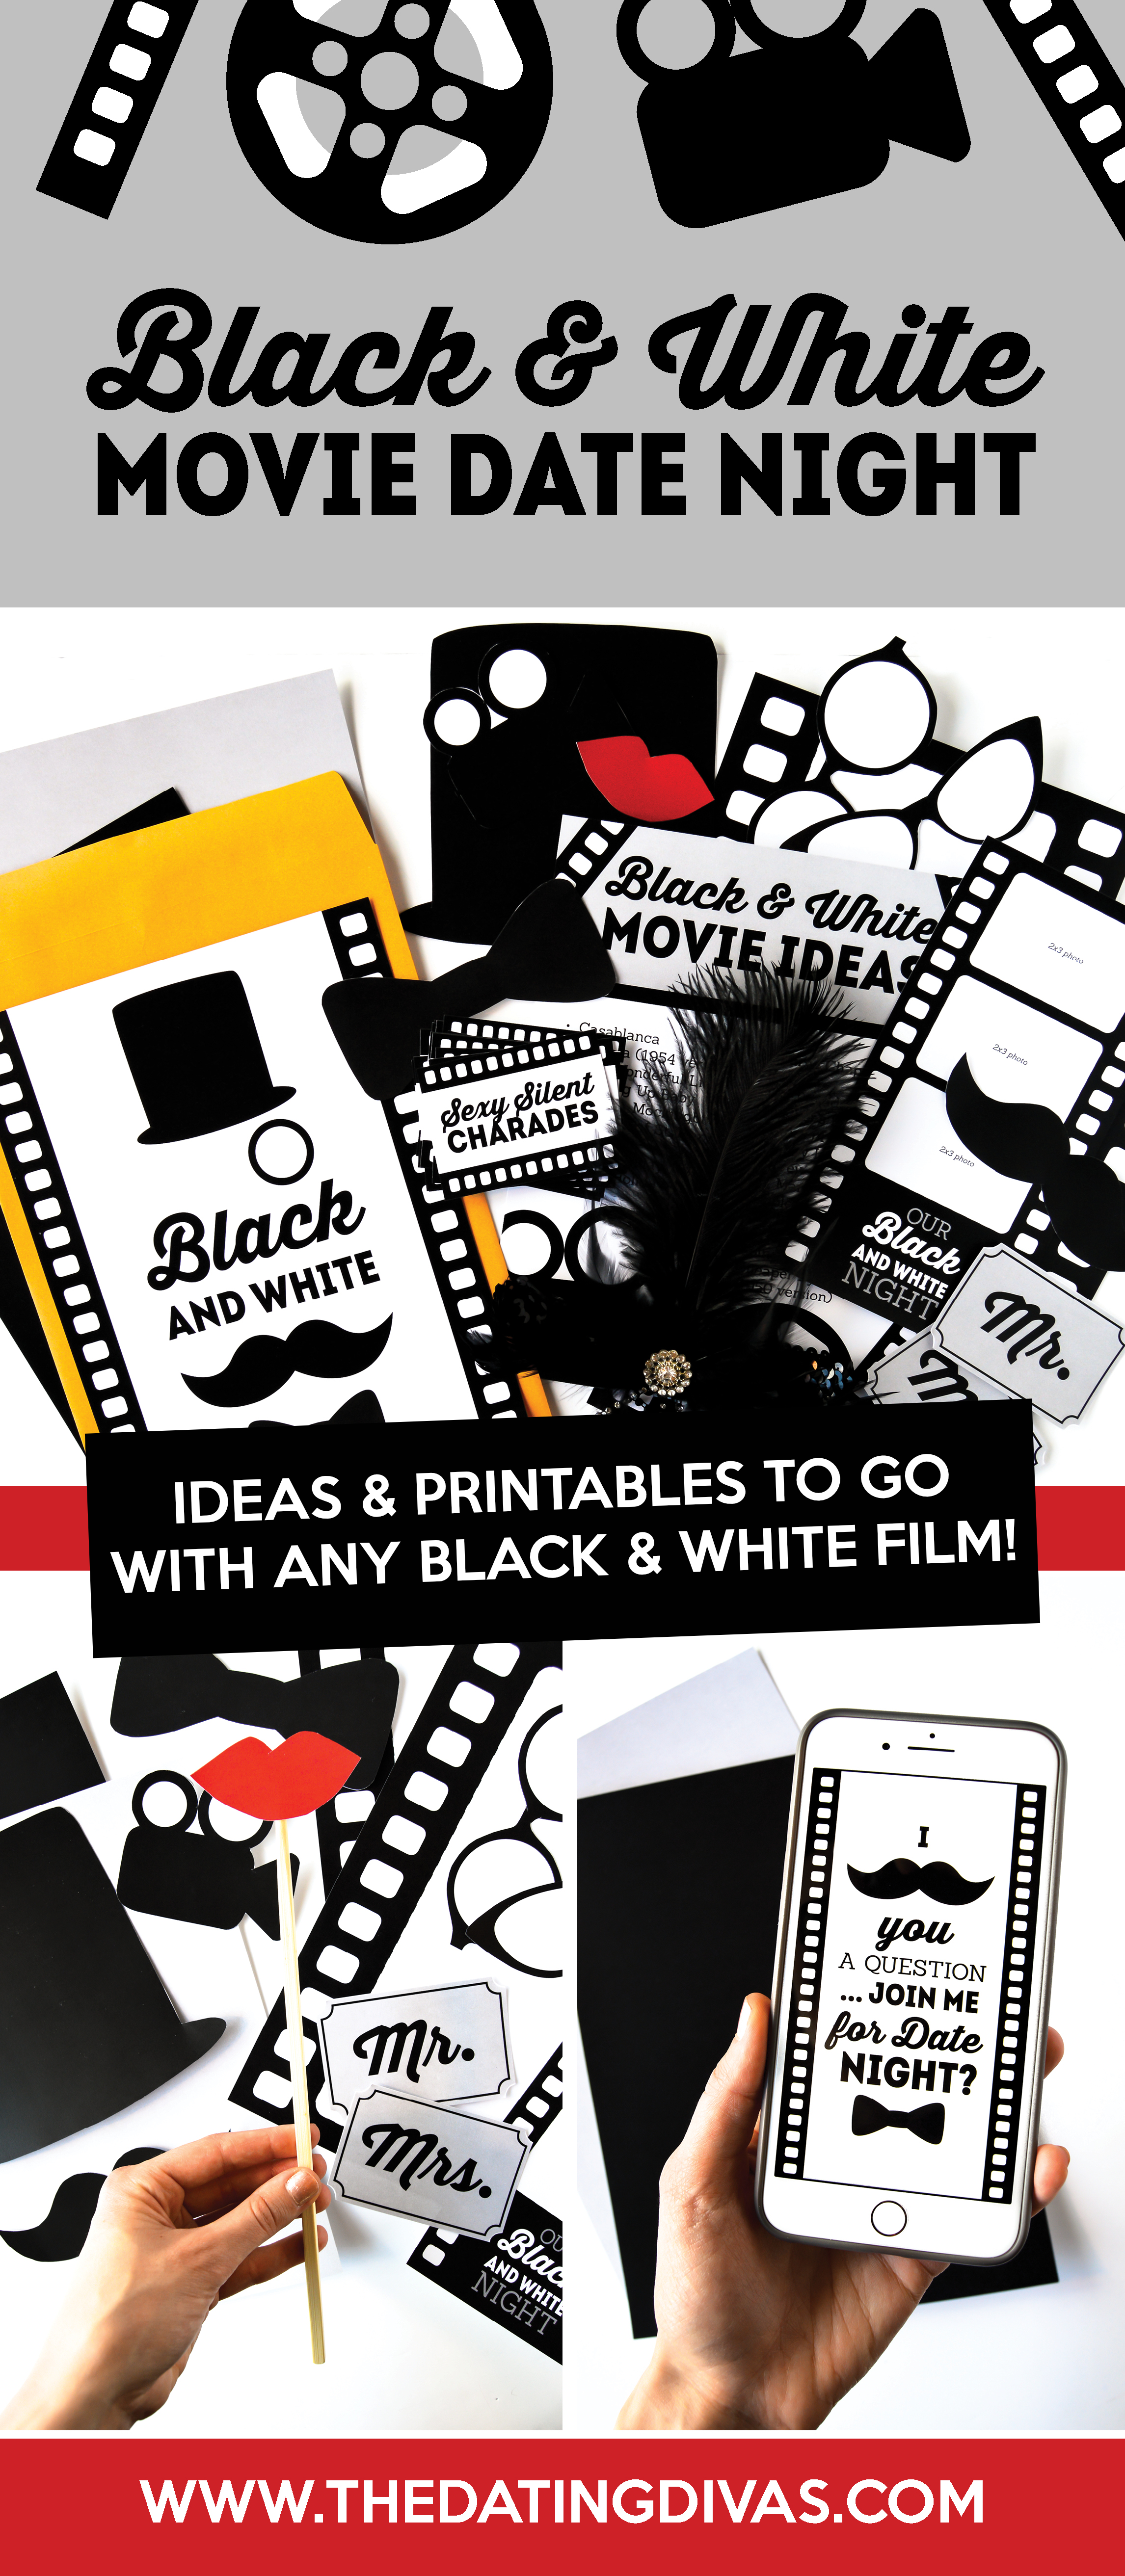 A black and white movie night you and your spouse will LOVE!! #MovieNight #DatingDivas